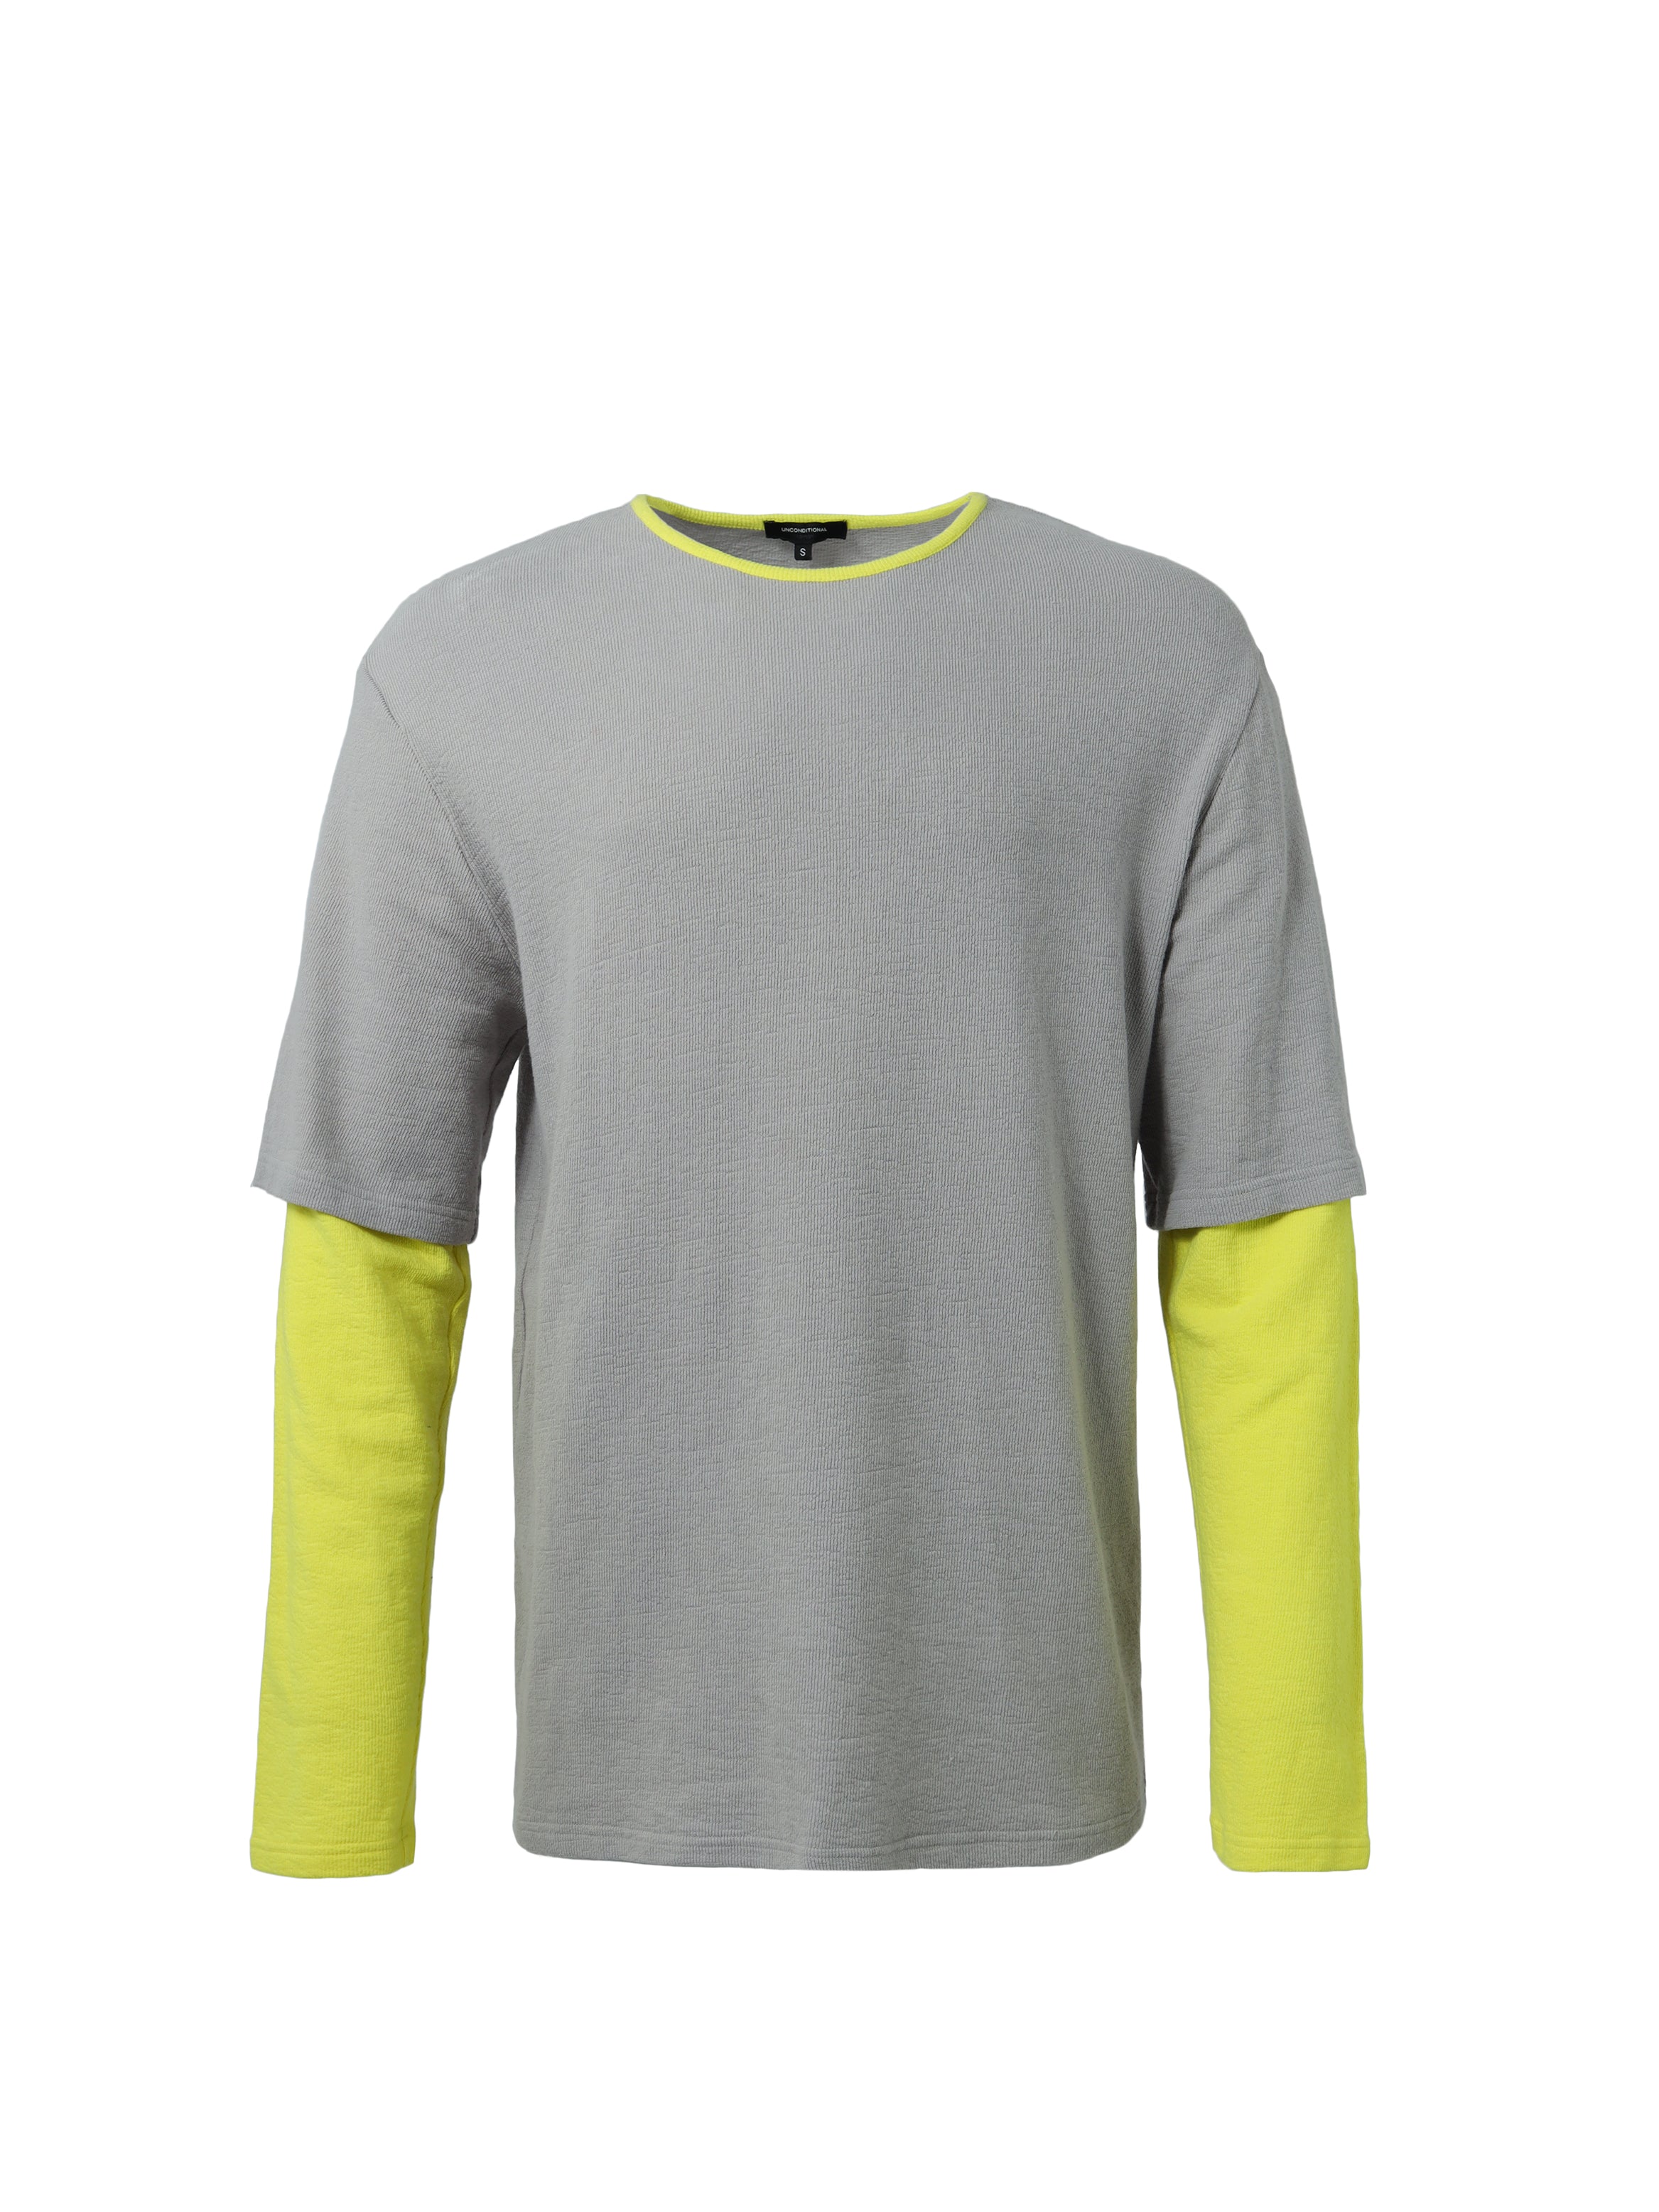 Grey Long Sleeved Top With Yellow Detailing